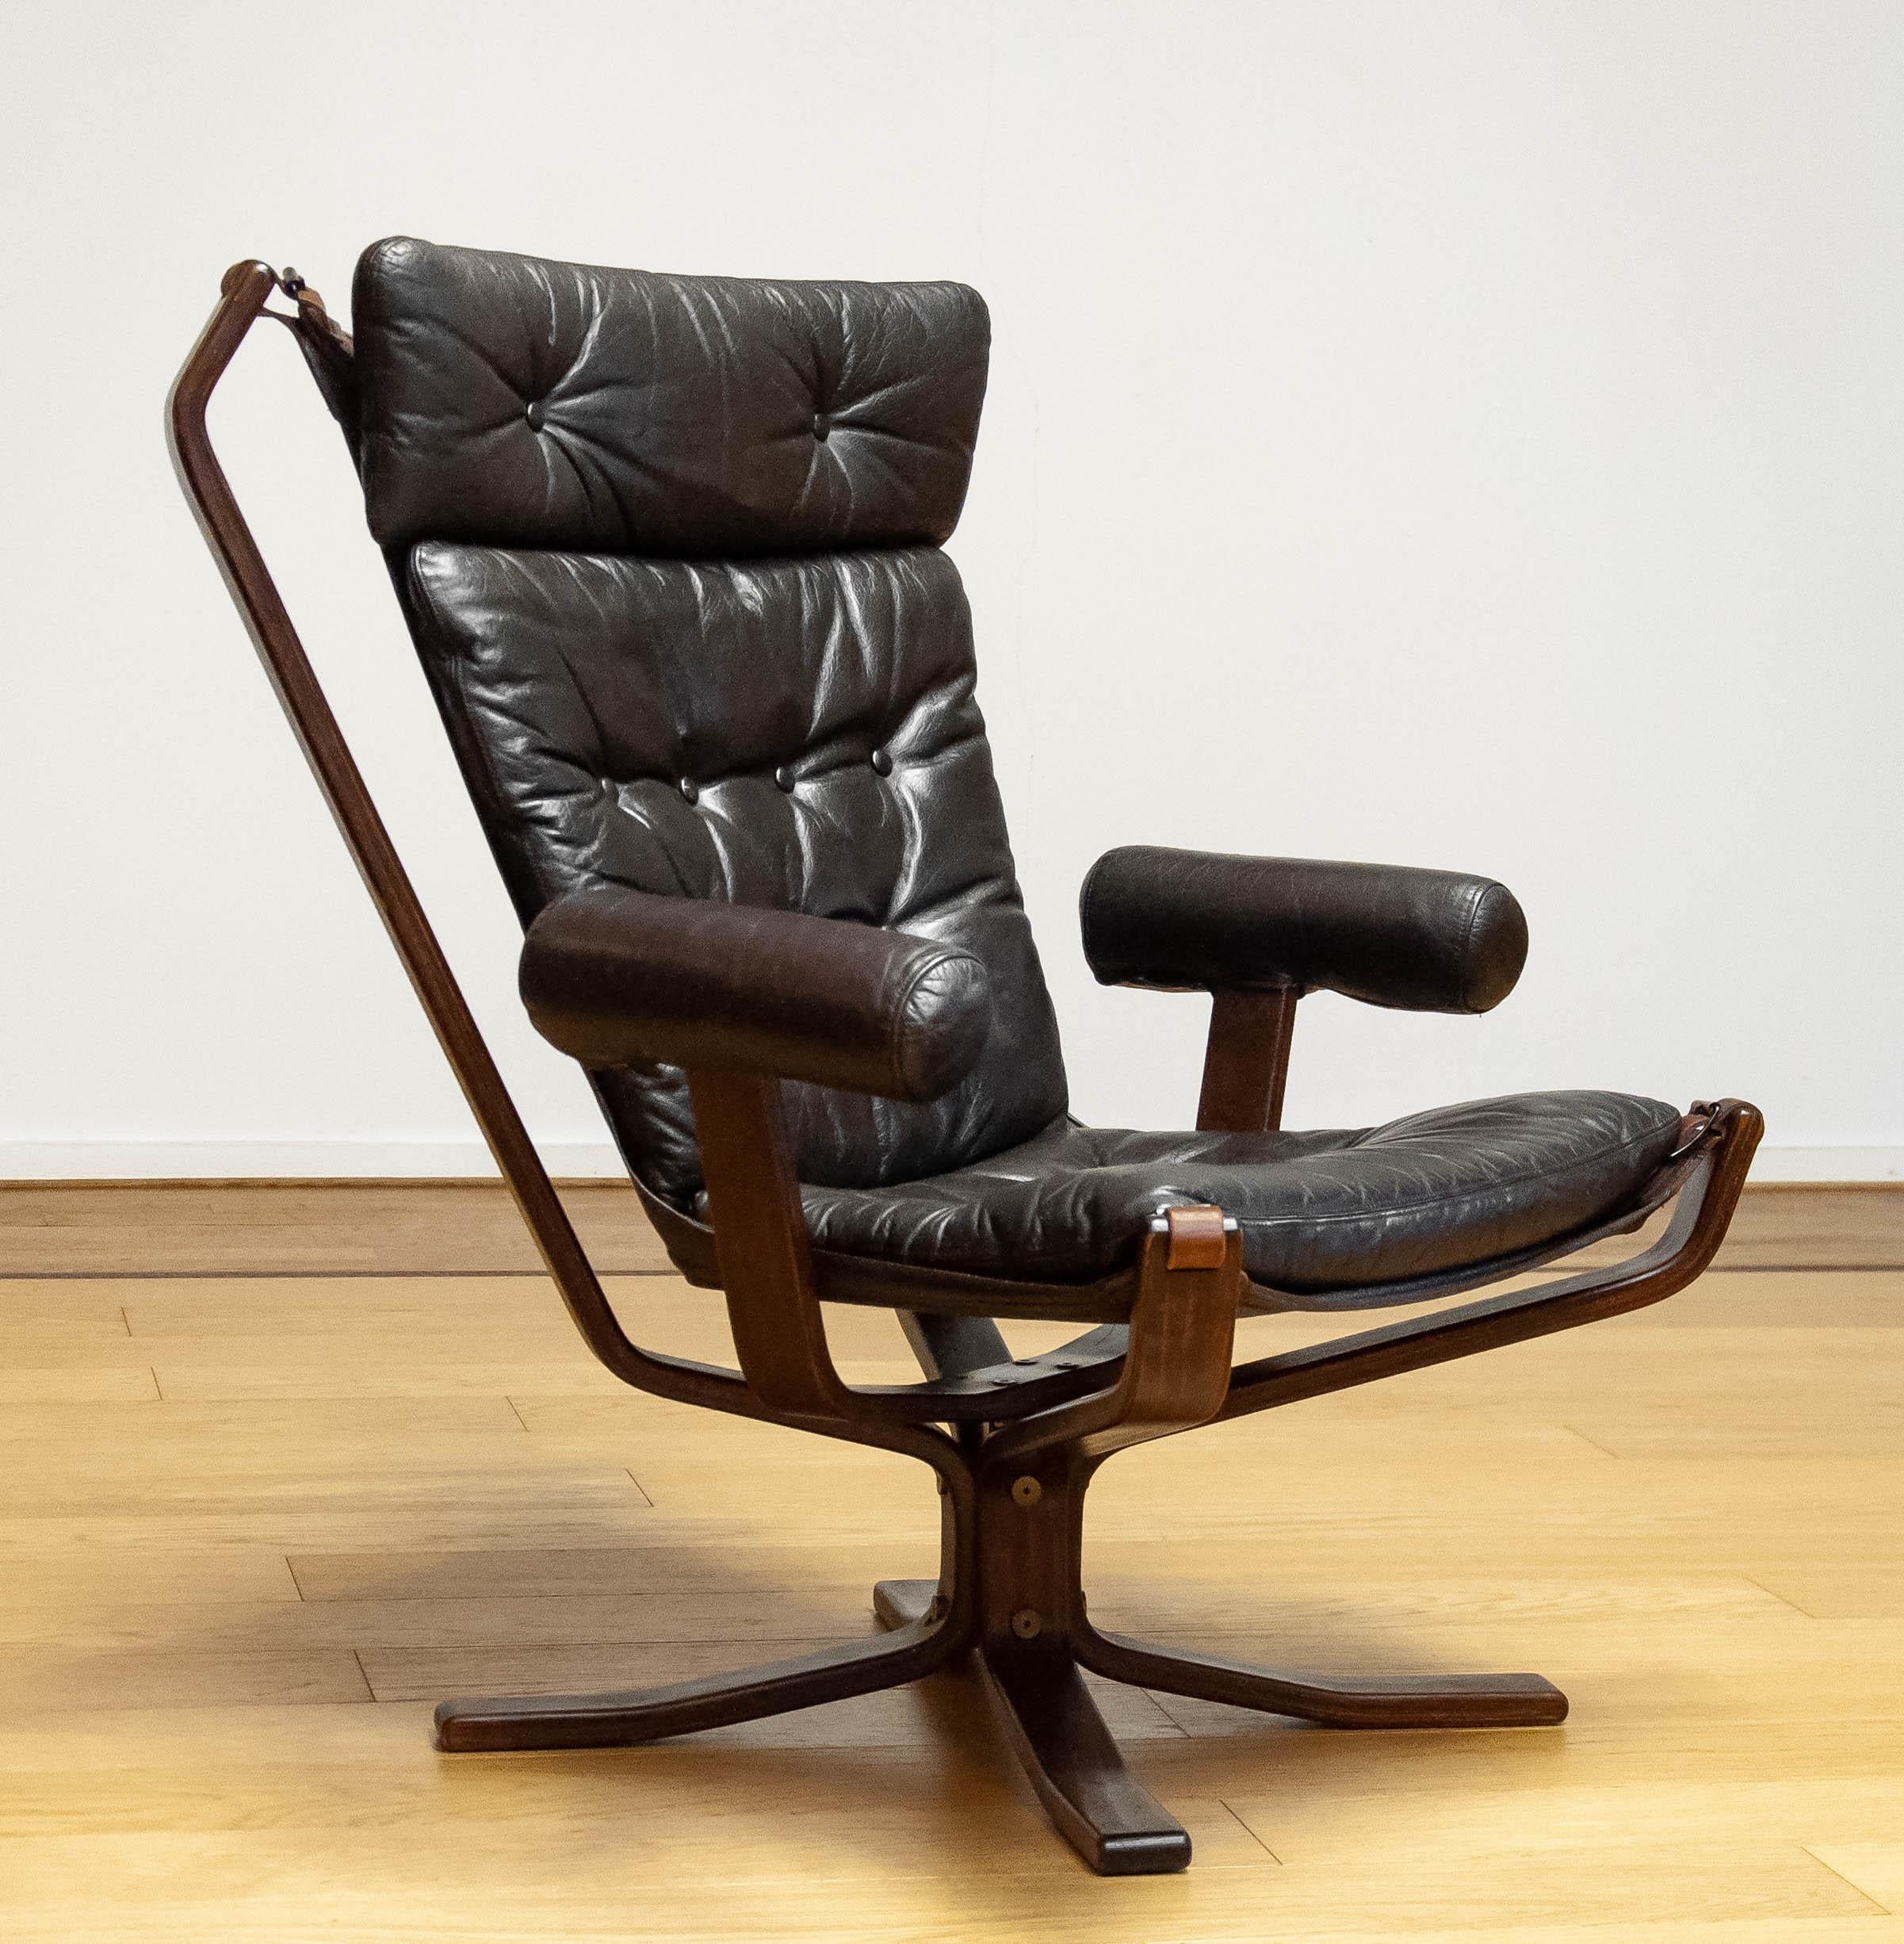 Beautiful rare lounge chair model 'Superstar' designed by Sigurd Ressel and made by Trygg Mobler in Denmark.
These models were made in a limited edition.
Also famous under the name 